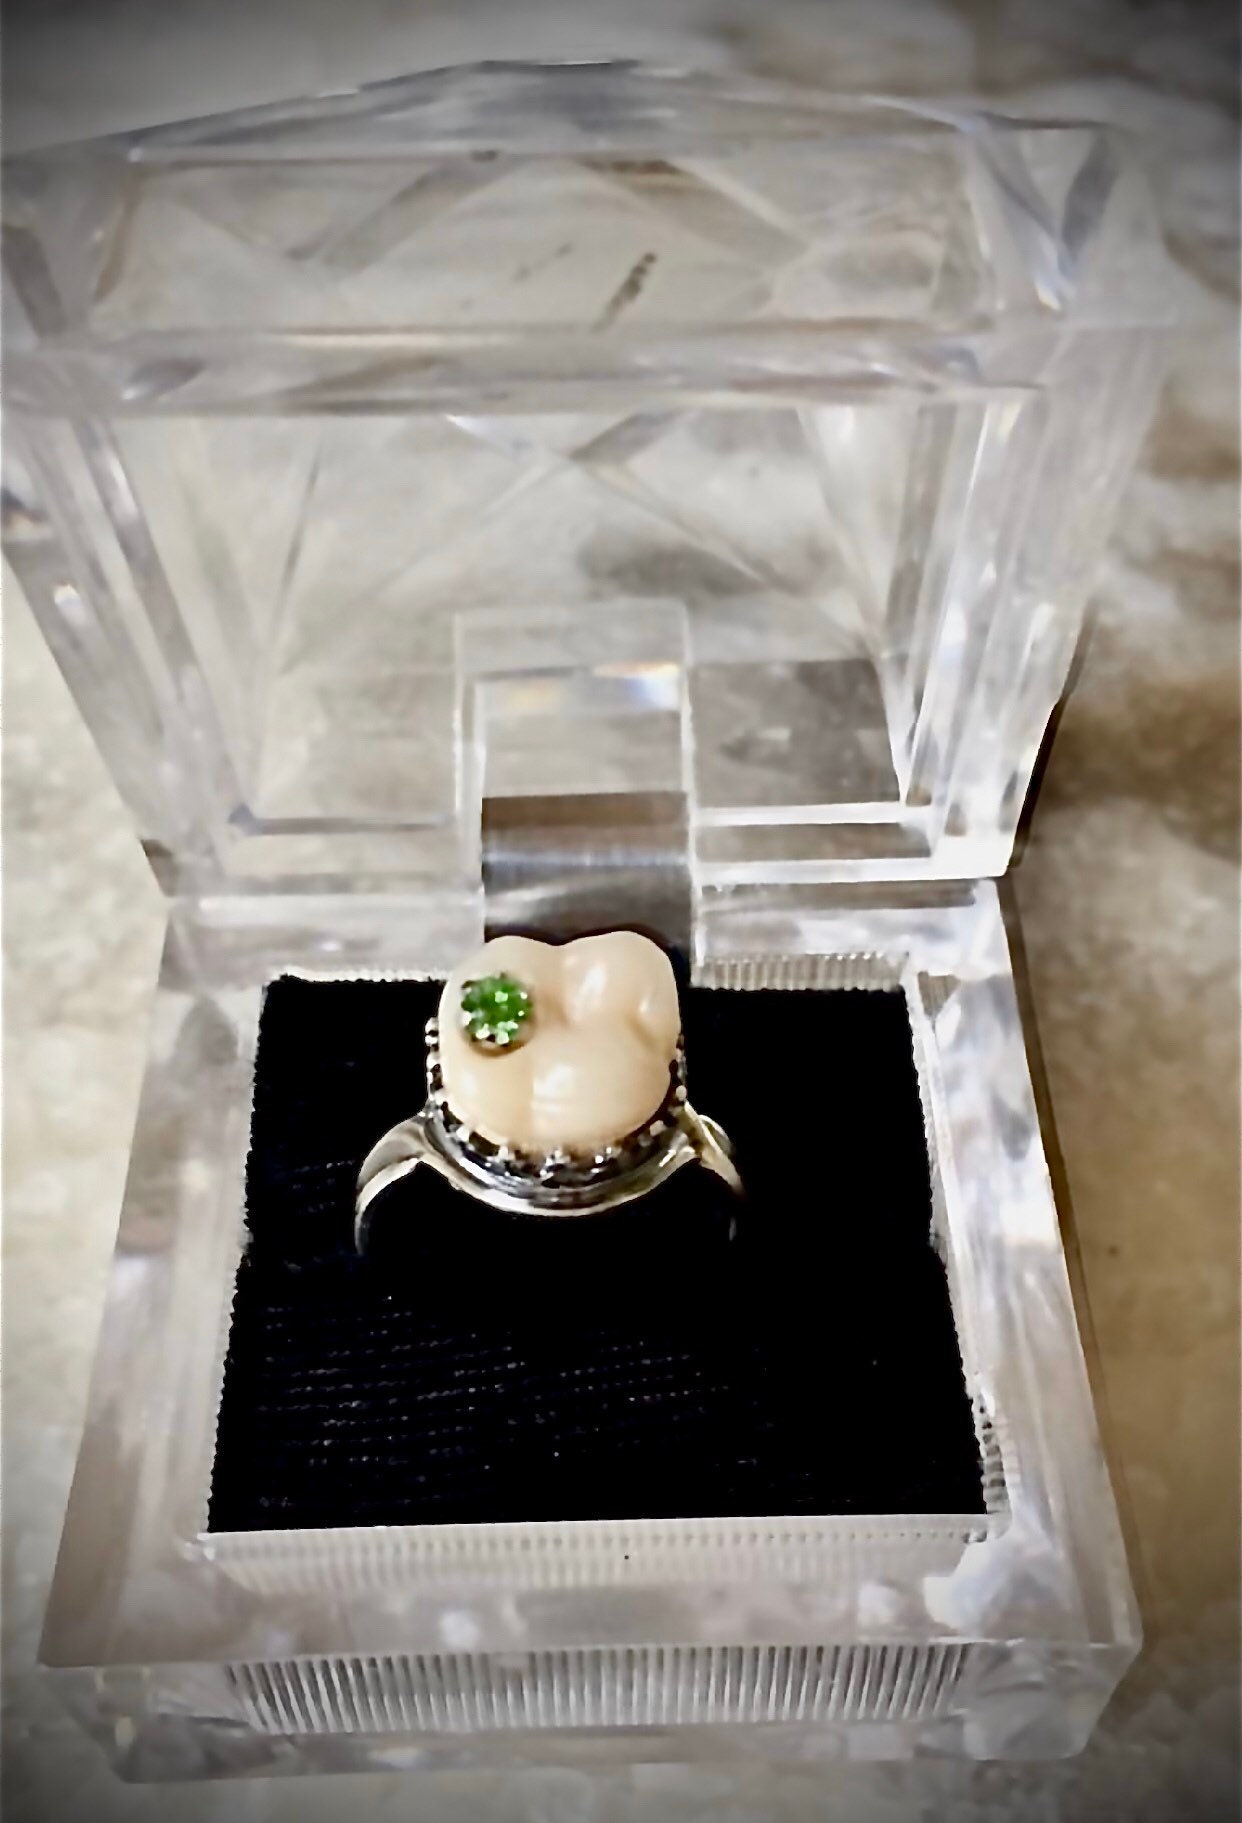 70-year-old woman discovers a rare pearl in dinner, uses it for an  engagement ring